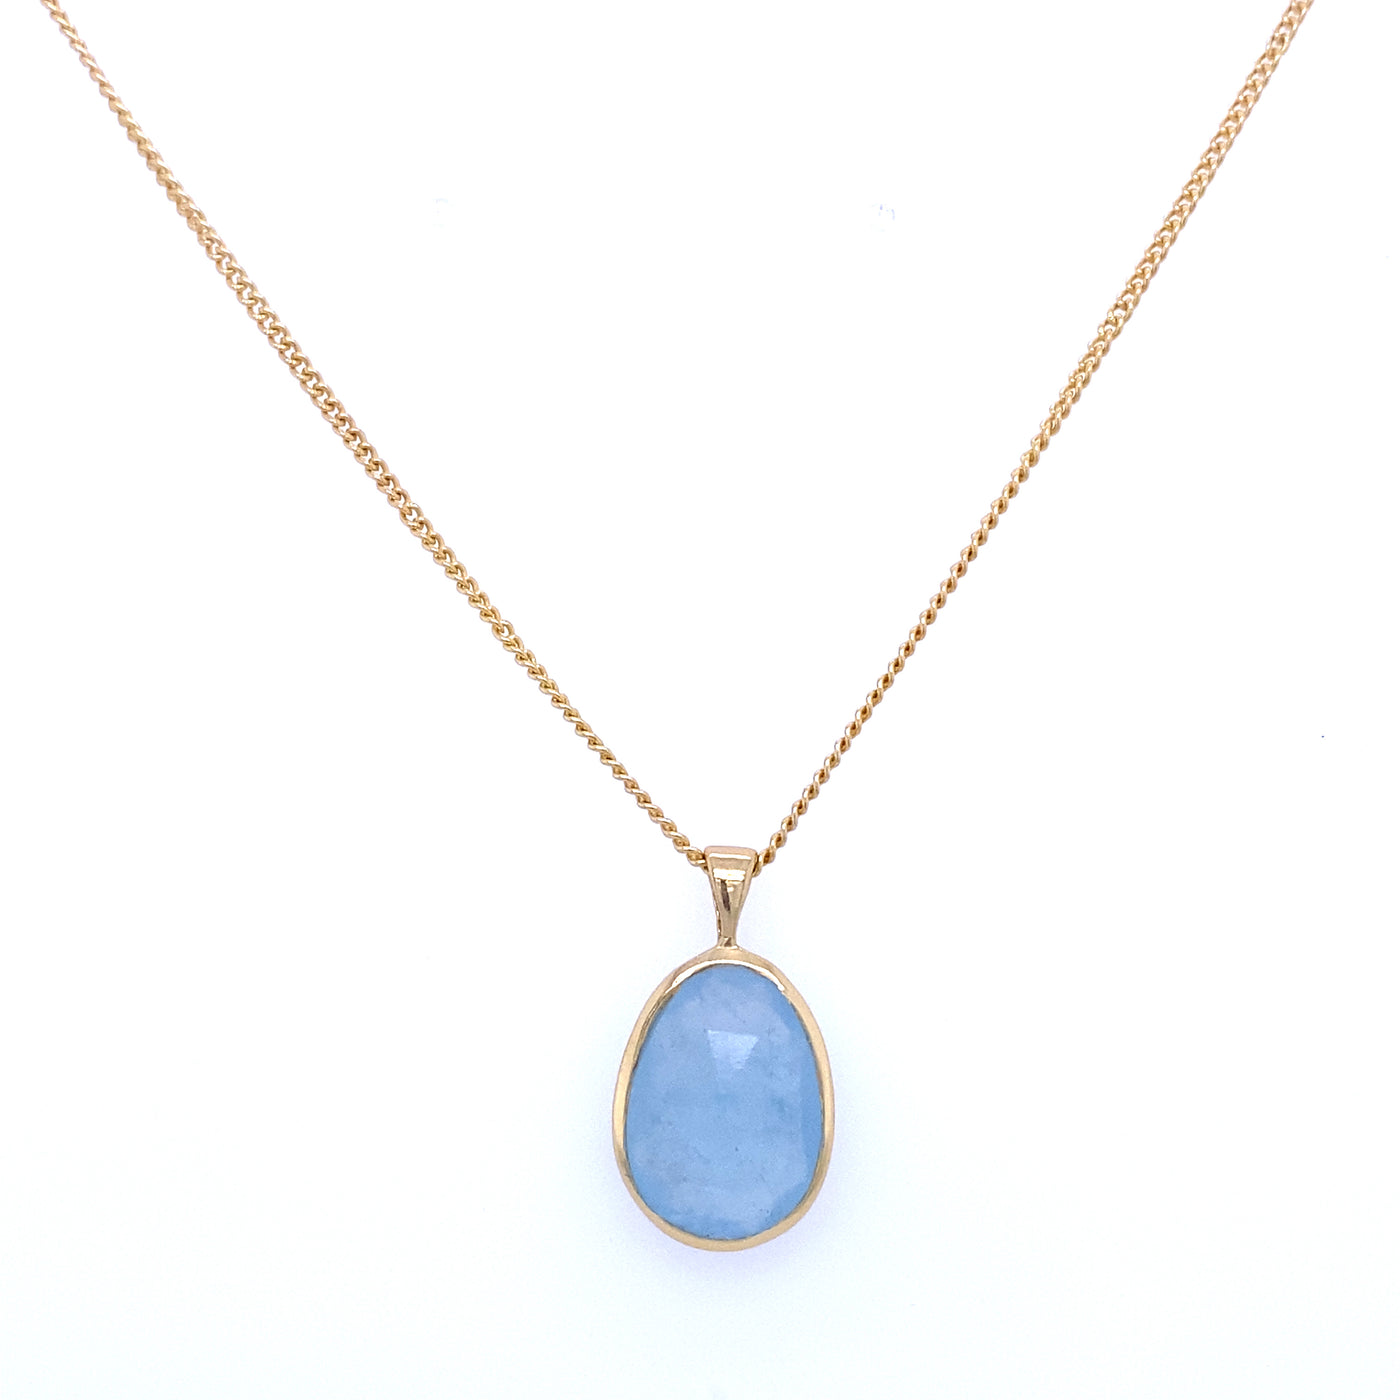 Oval Faceted Gemstone Necklace